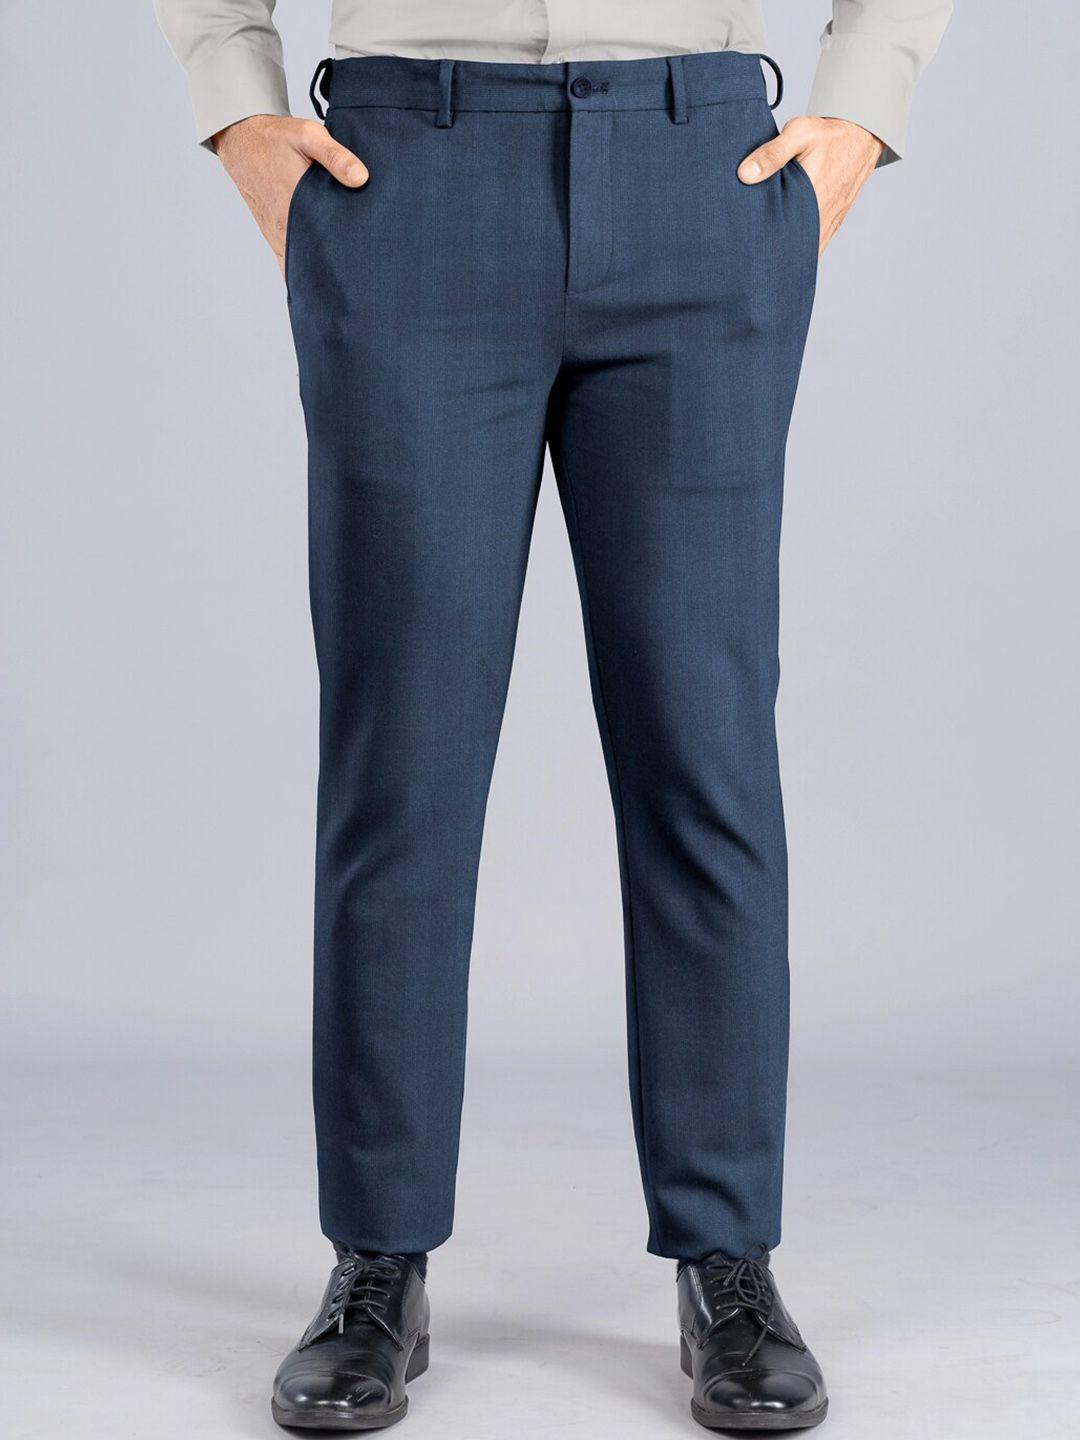 the pant project men checked tailored slim fit wrinkle free formal trousers